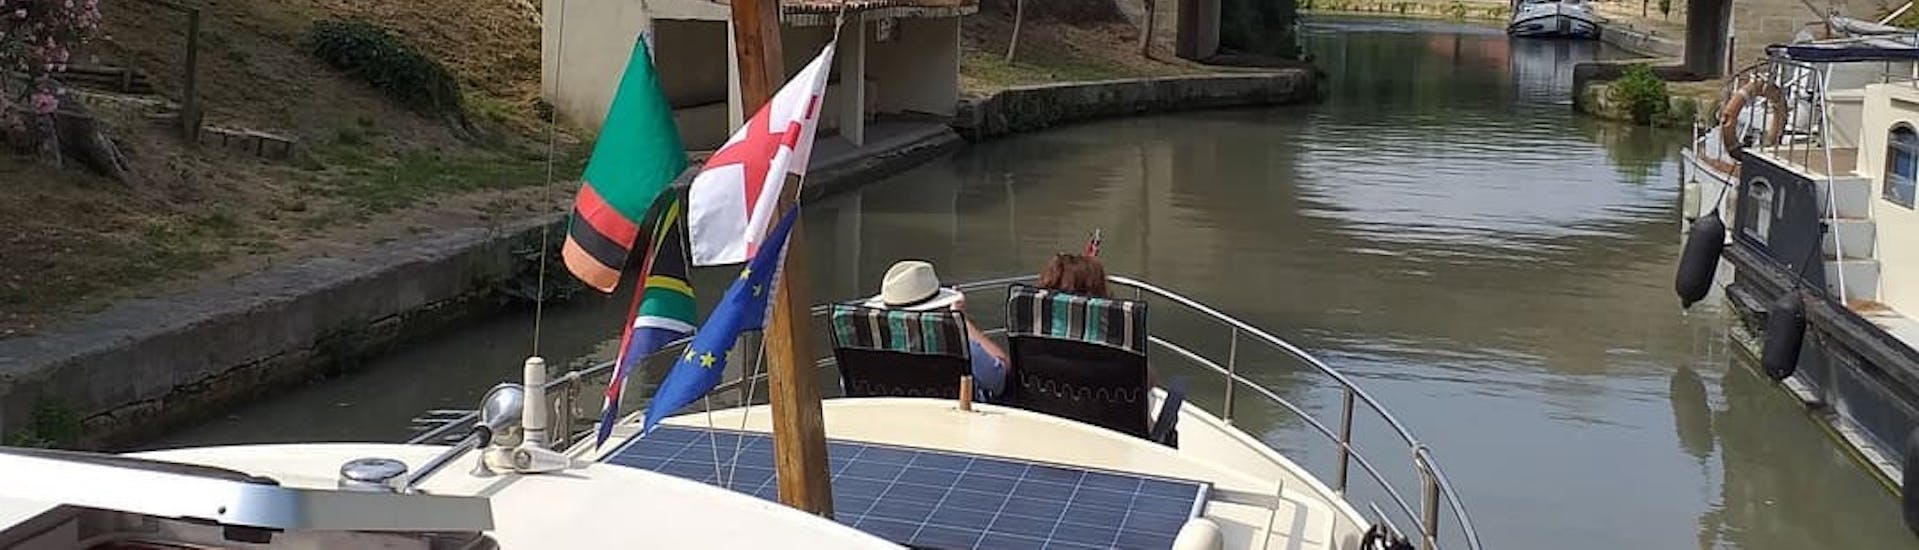 Exclusive cruisise boat on the canal du midi navigating upstream.